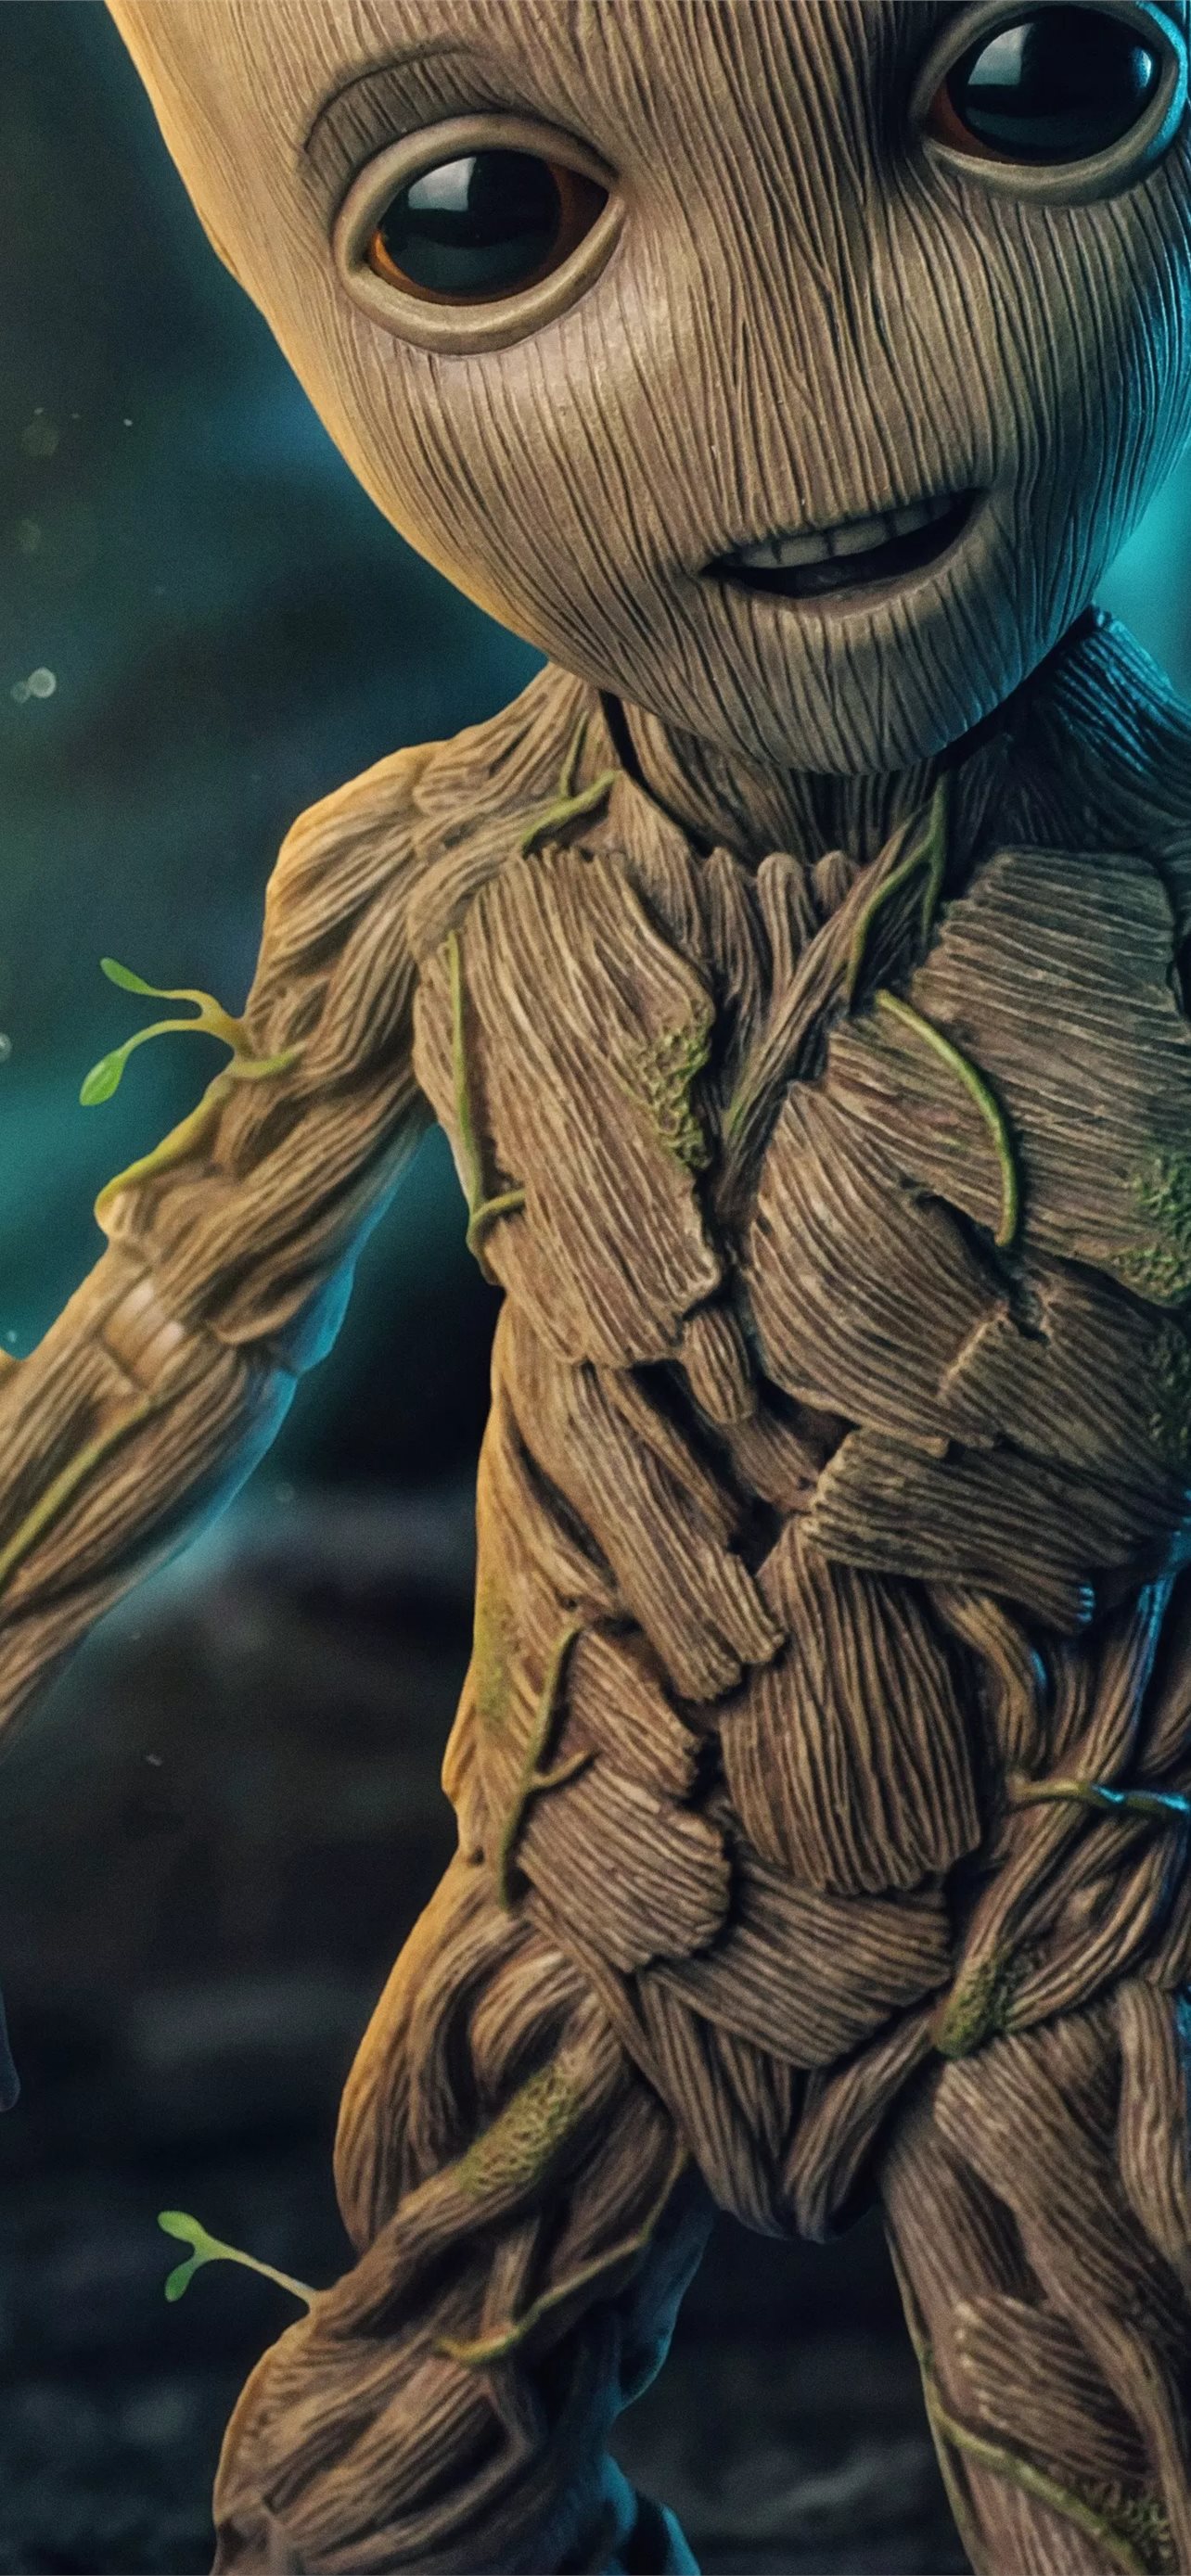 Share 93+ about baby groot wallpaper best .vn